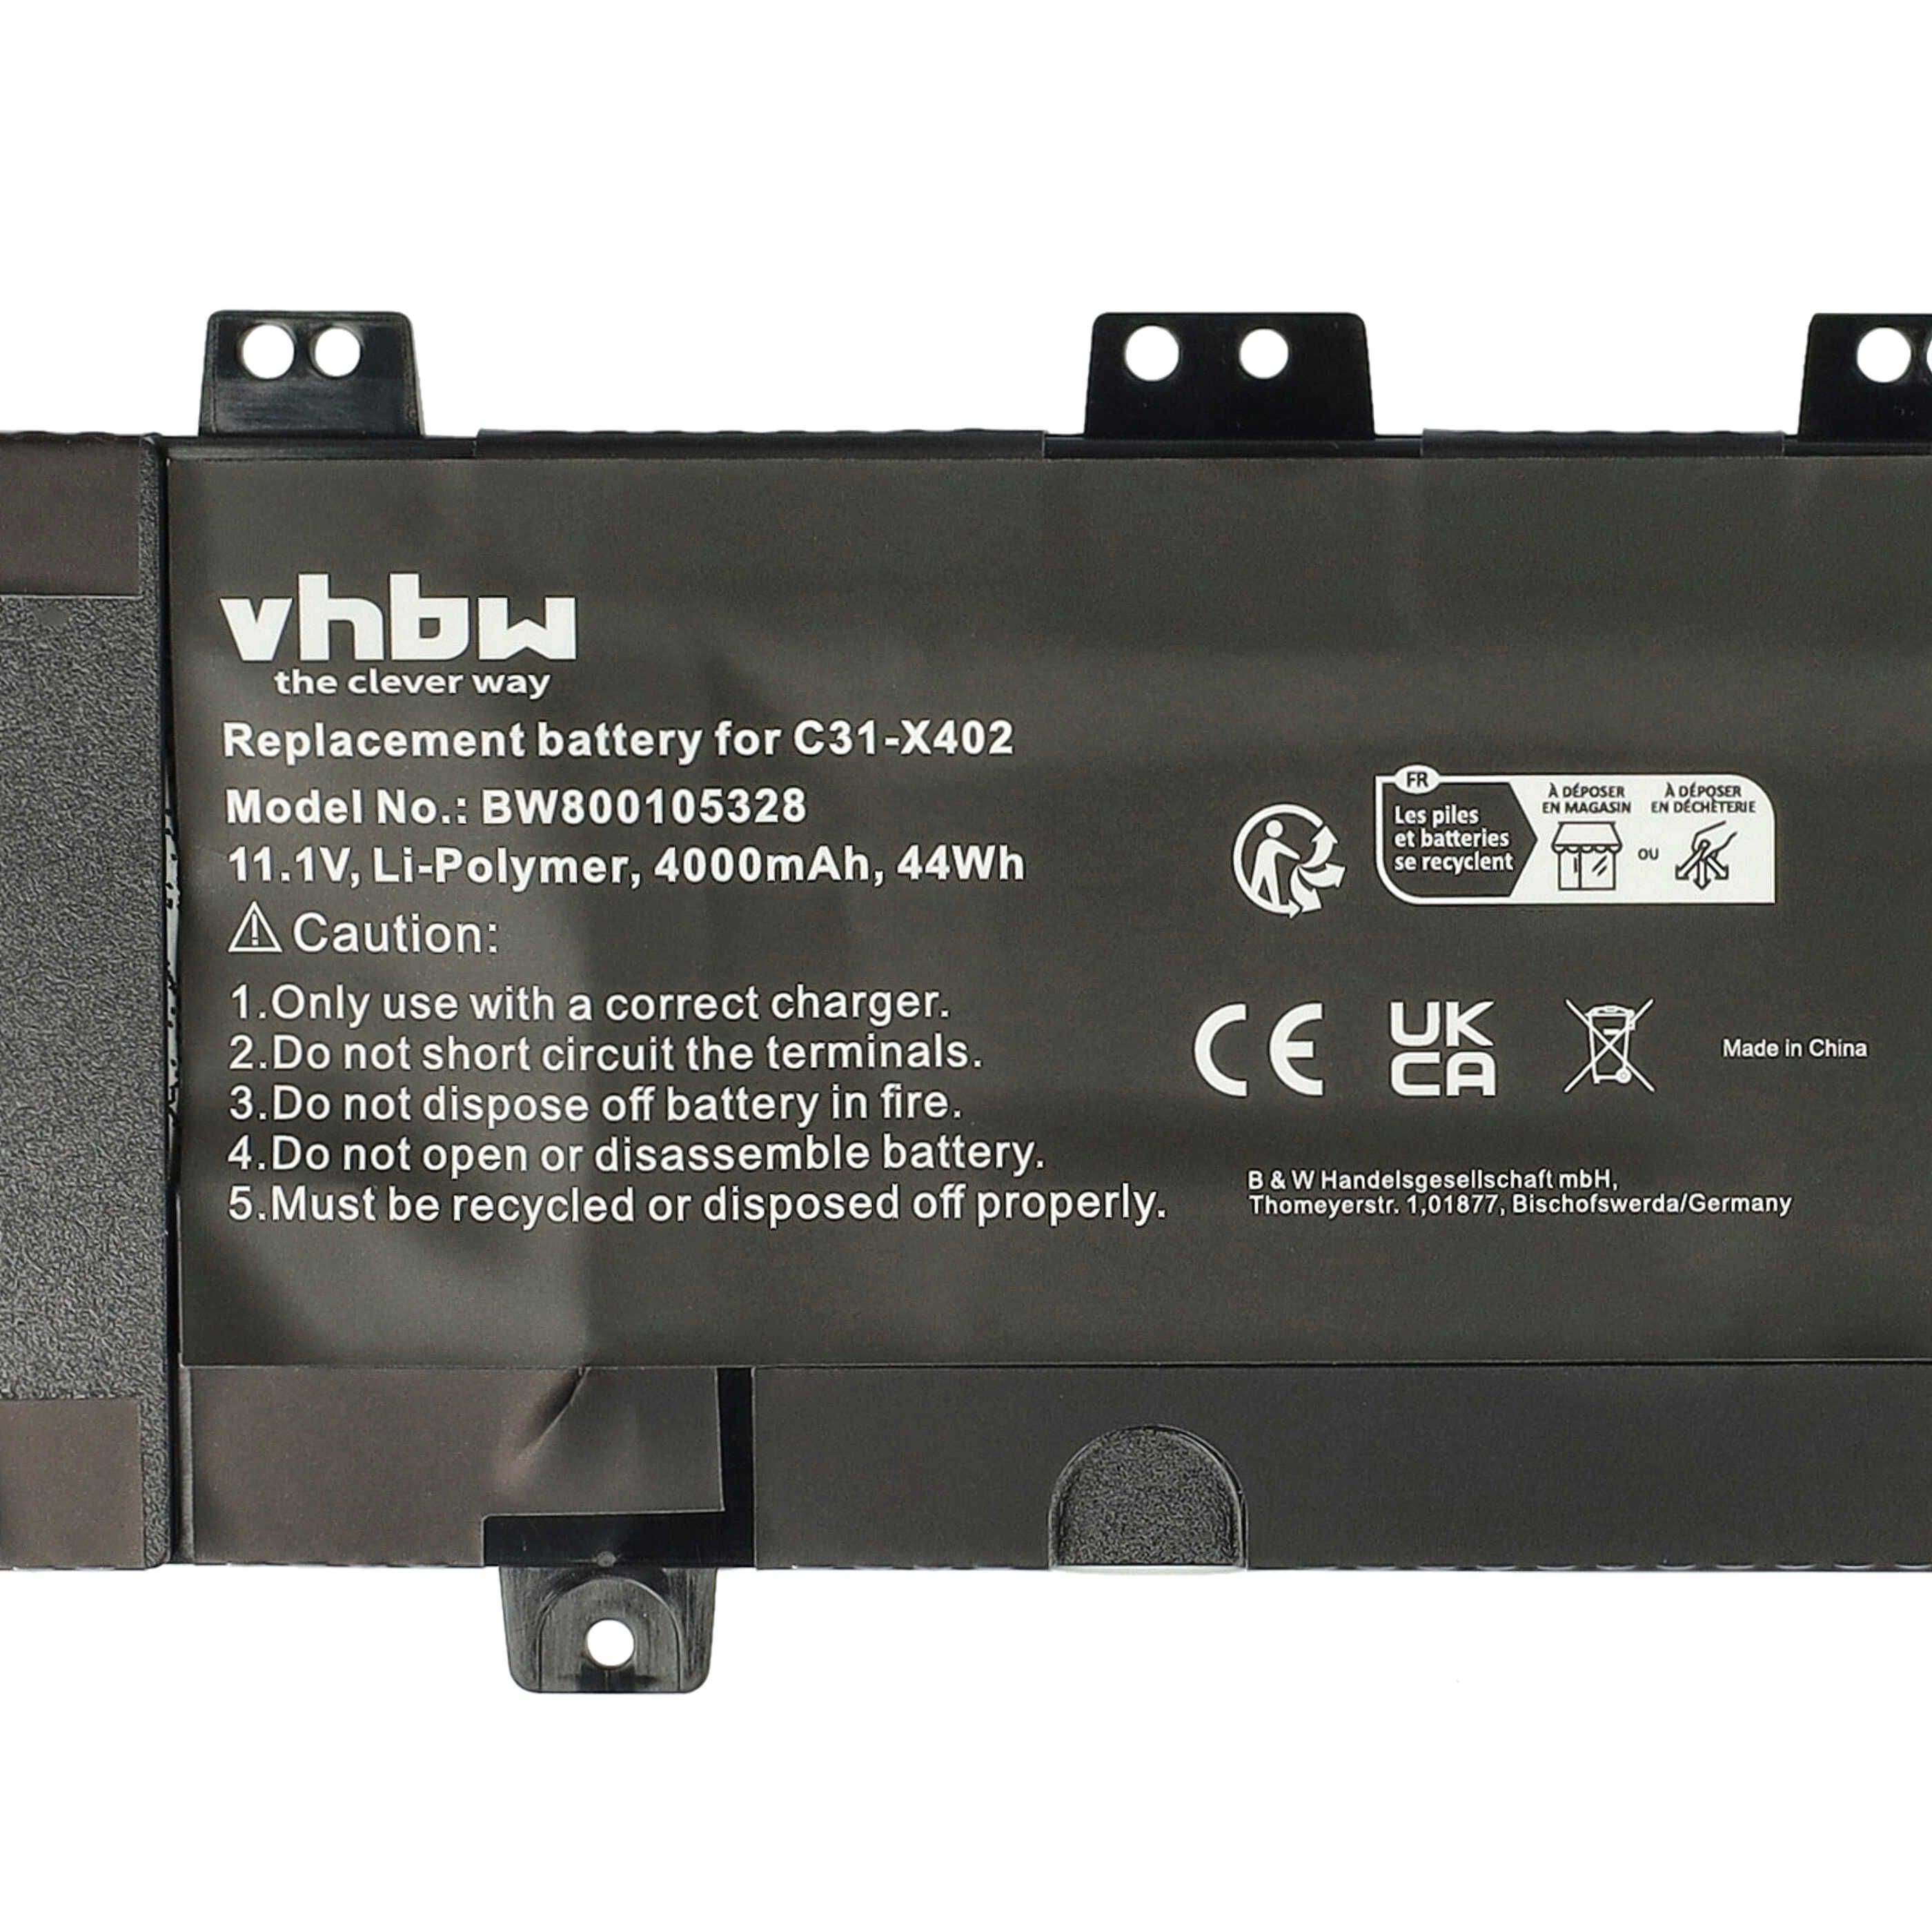 Notebook Battery Replacement for C31-X402 - 4000mAh 11.1V Li-polymer